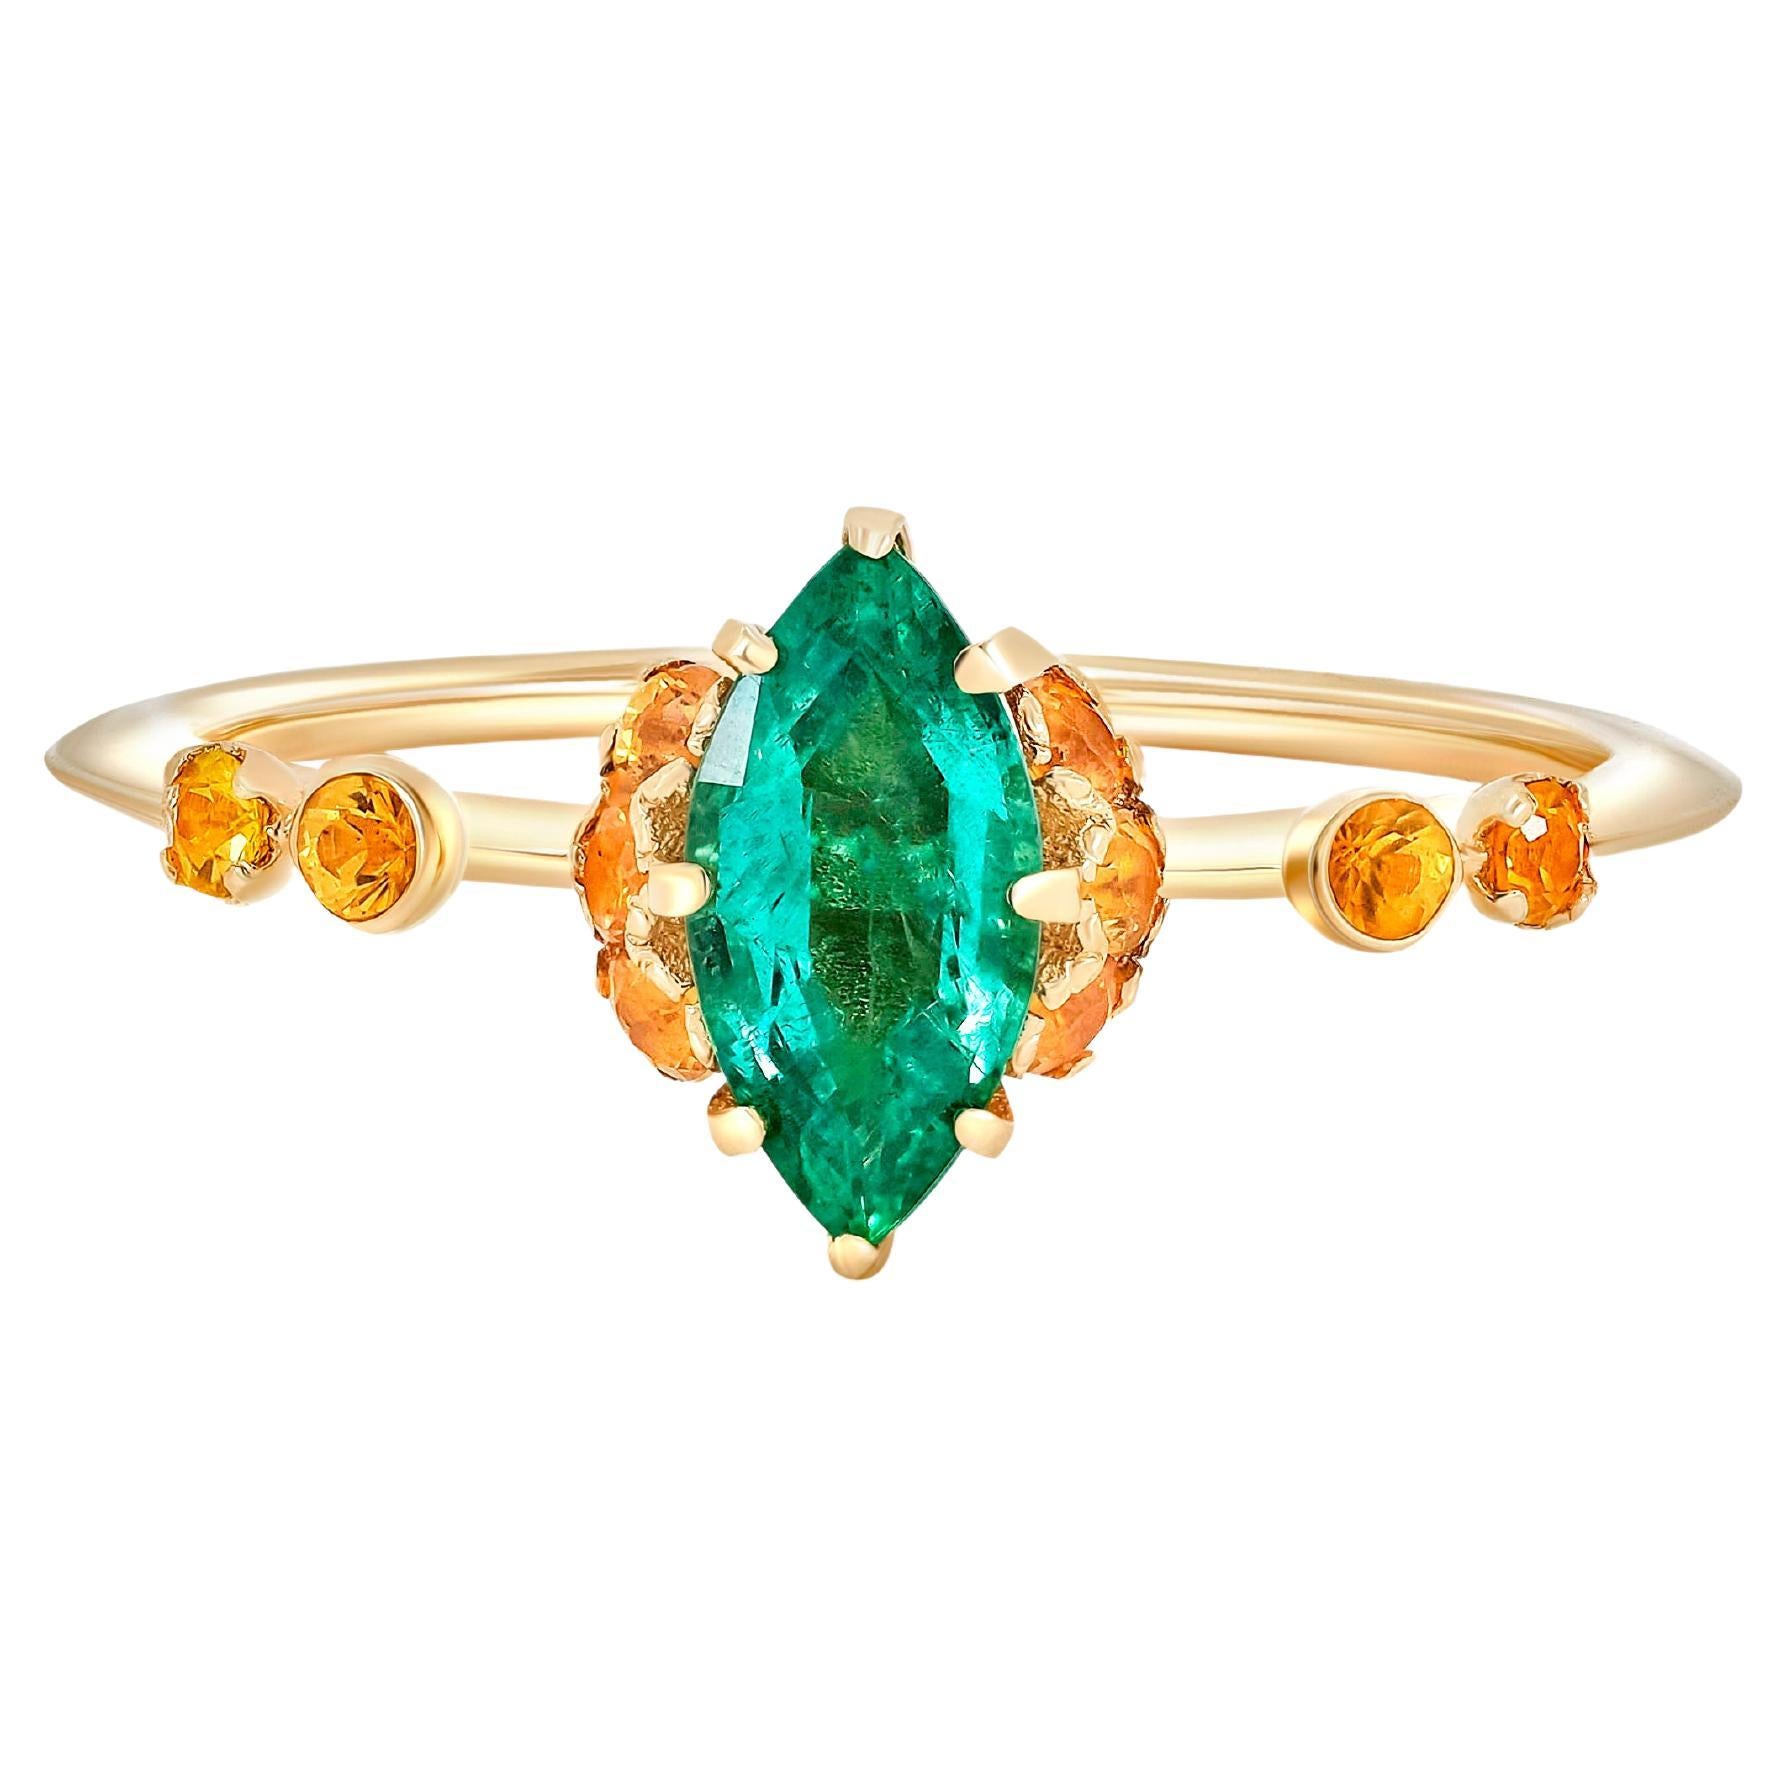 14 Karat Gold Ring with Emerald and Sapphires